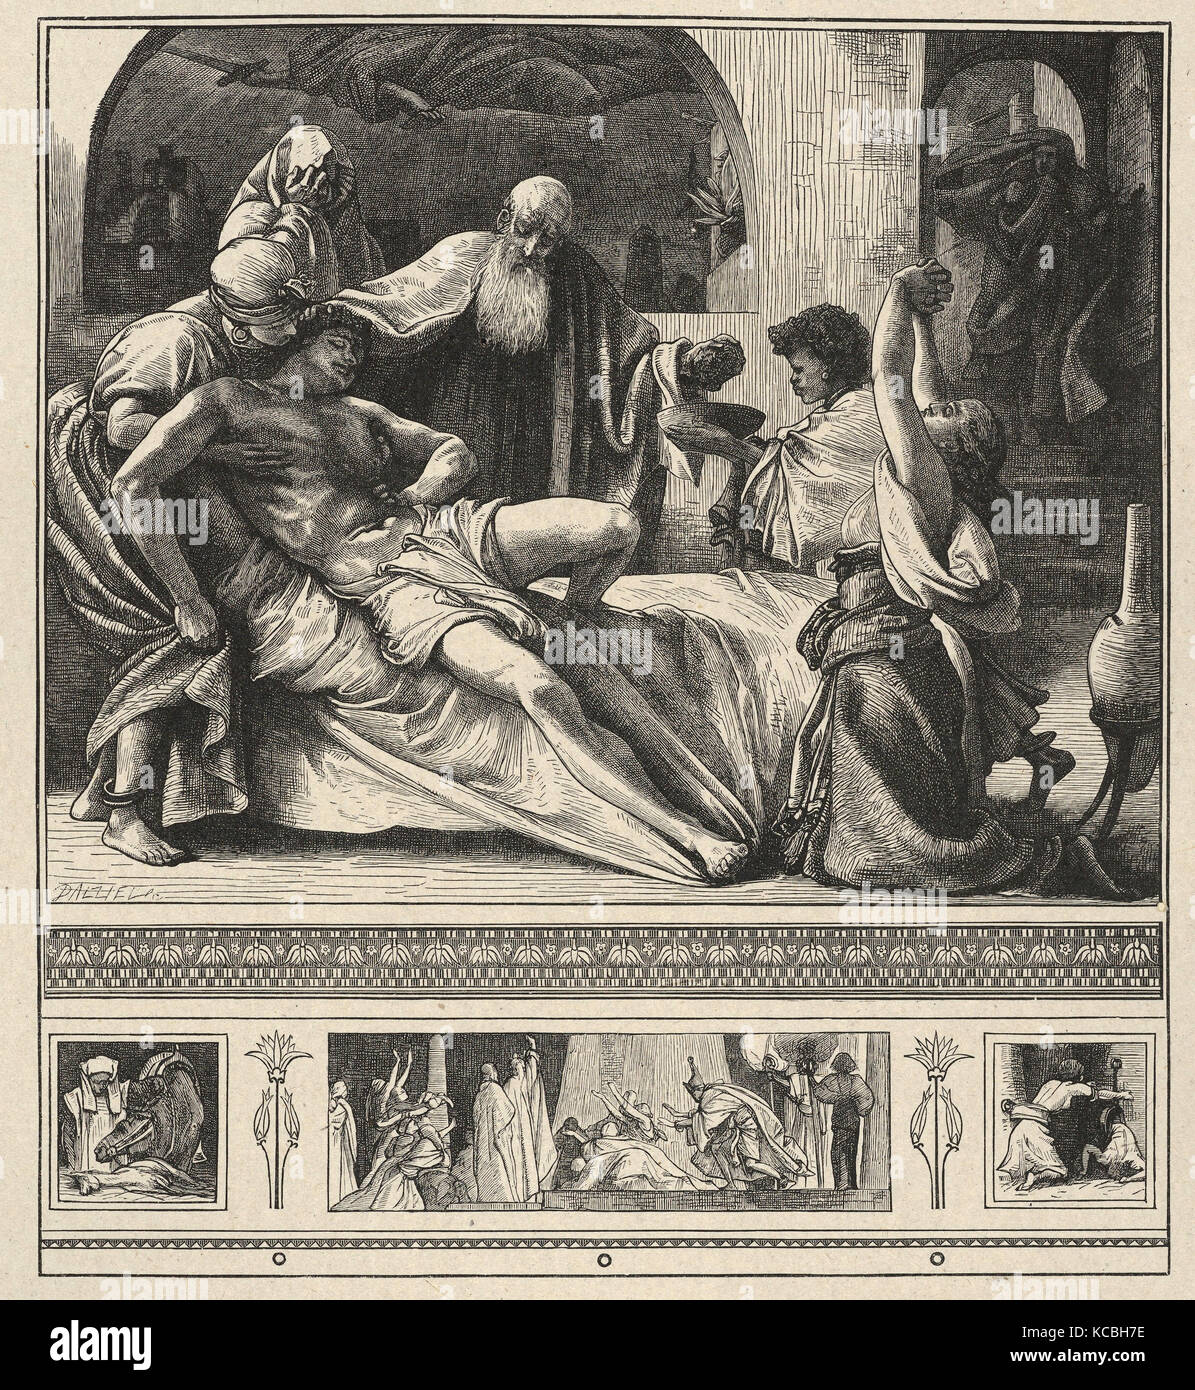 Drawings and Prints, Print, Death of the Firstborn (Dalziels' Bible Gallery Stock Photo